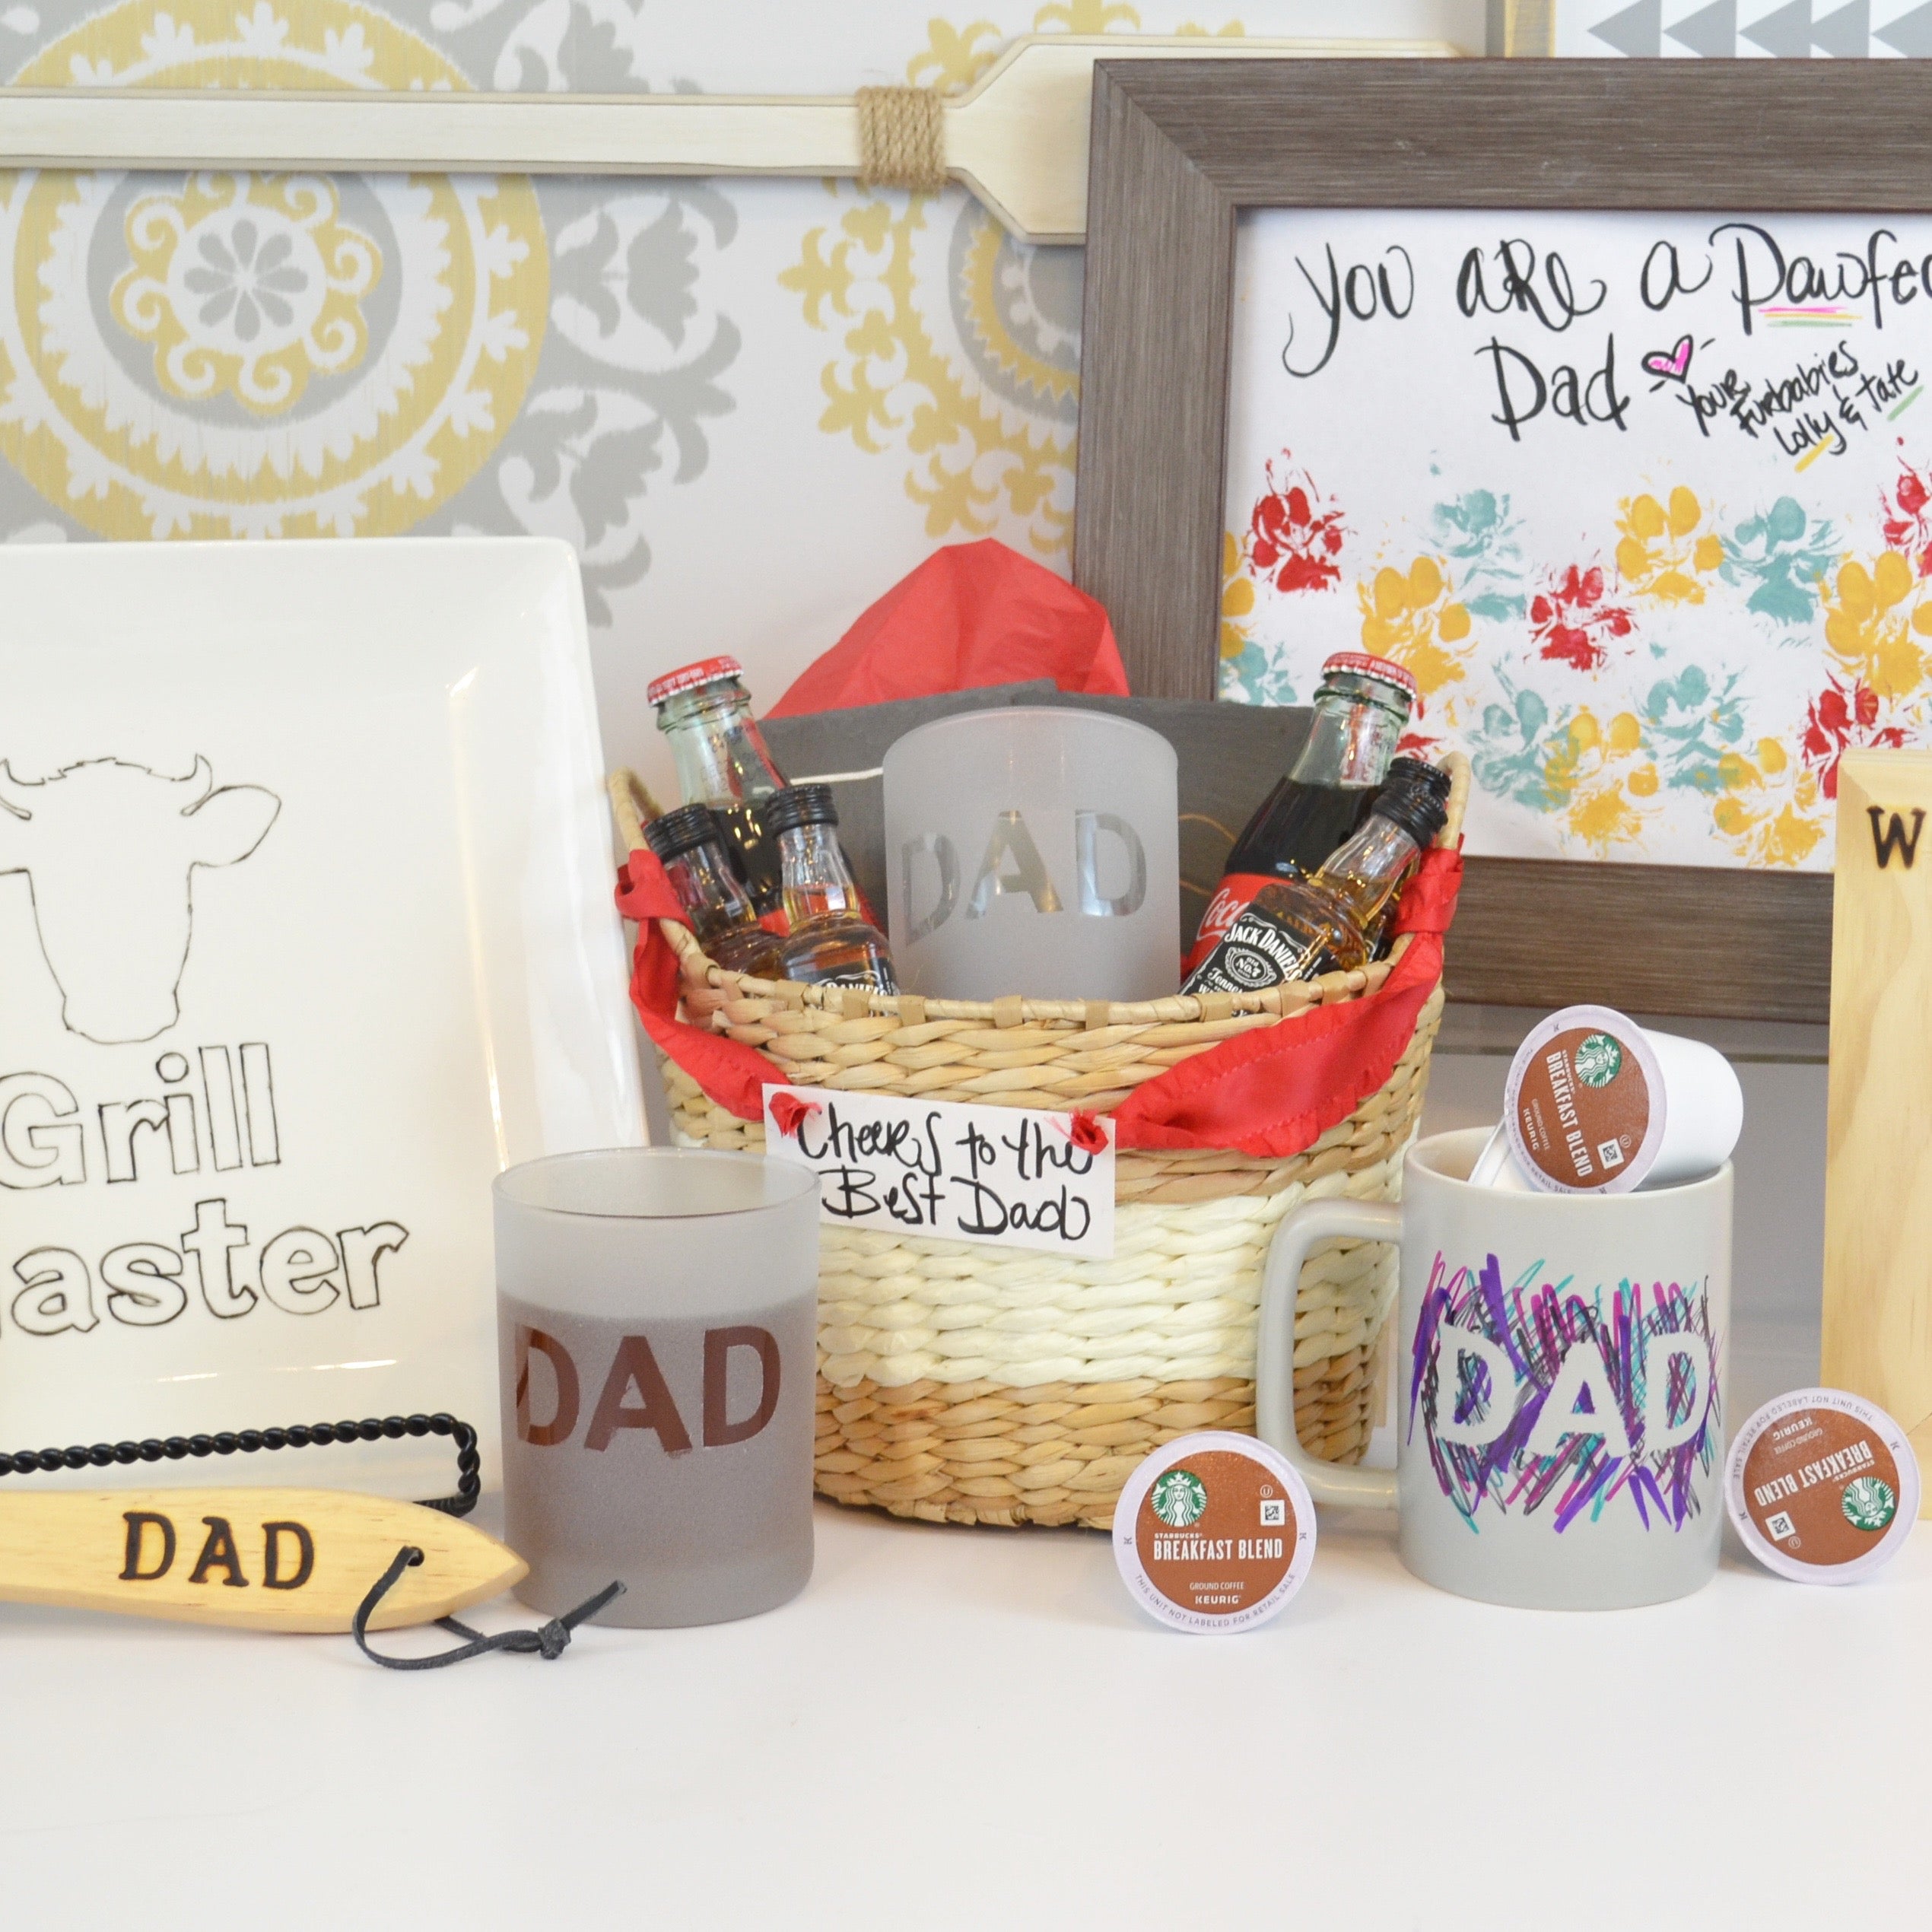 DIY Father's Day Gifts Under $30